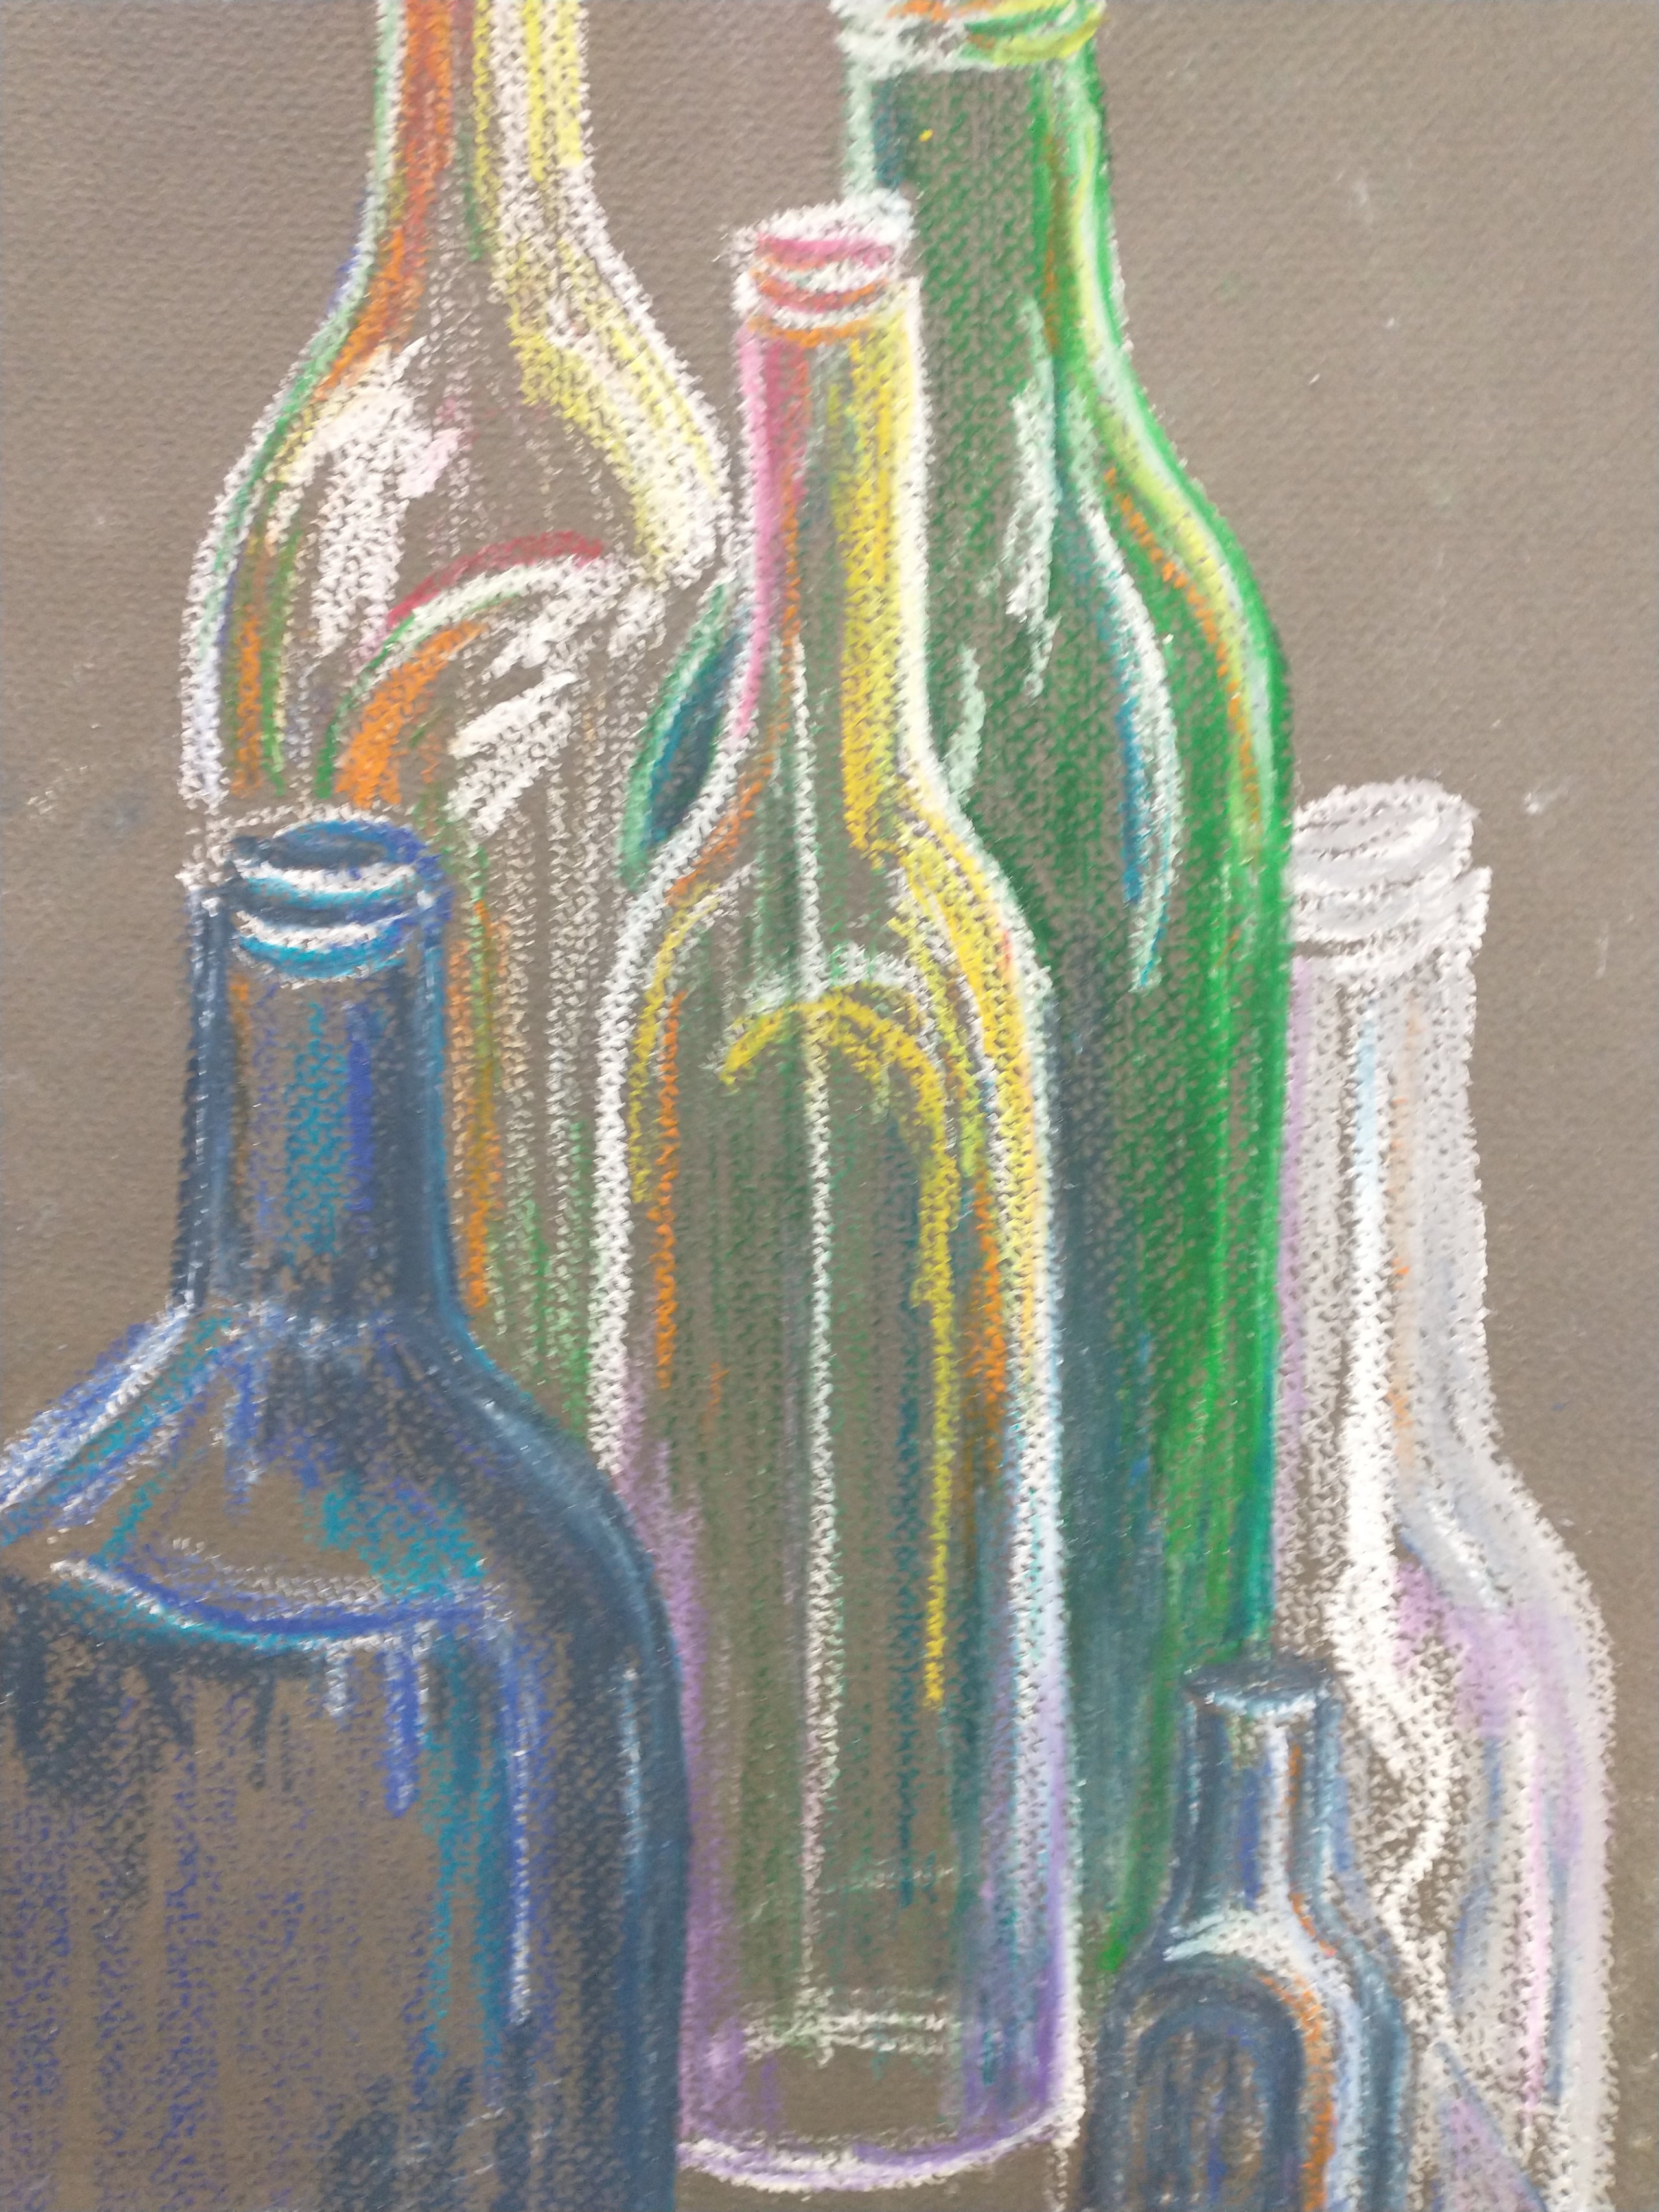 Chalk Pastel Bottle Still Life with Nancy Nelson Brotz January 16th  1:30-2:30pm, teen and adult